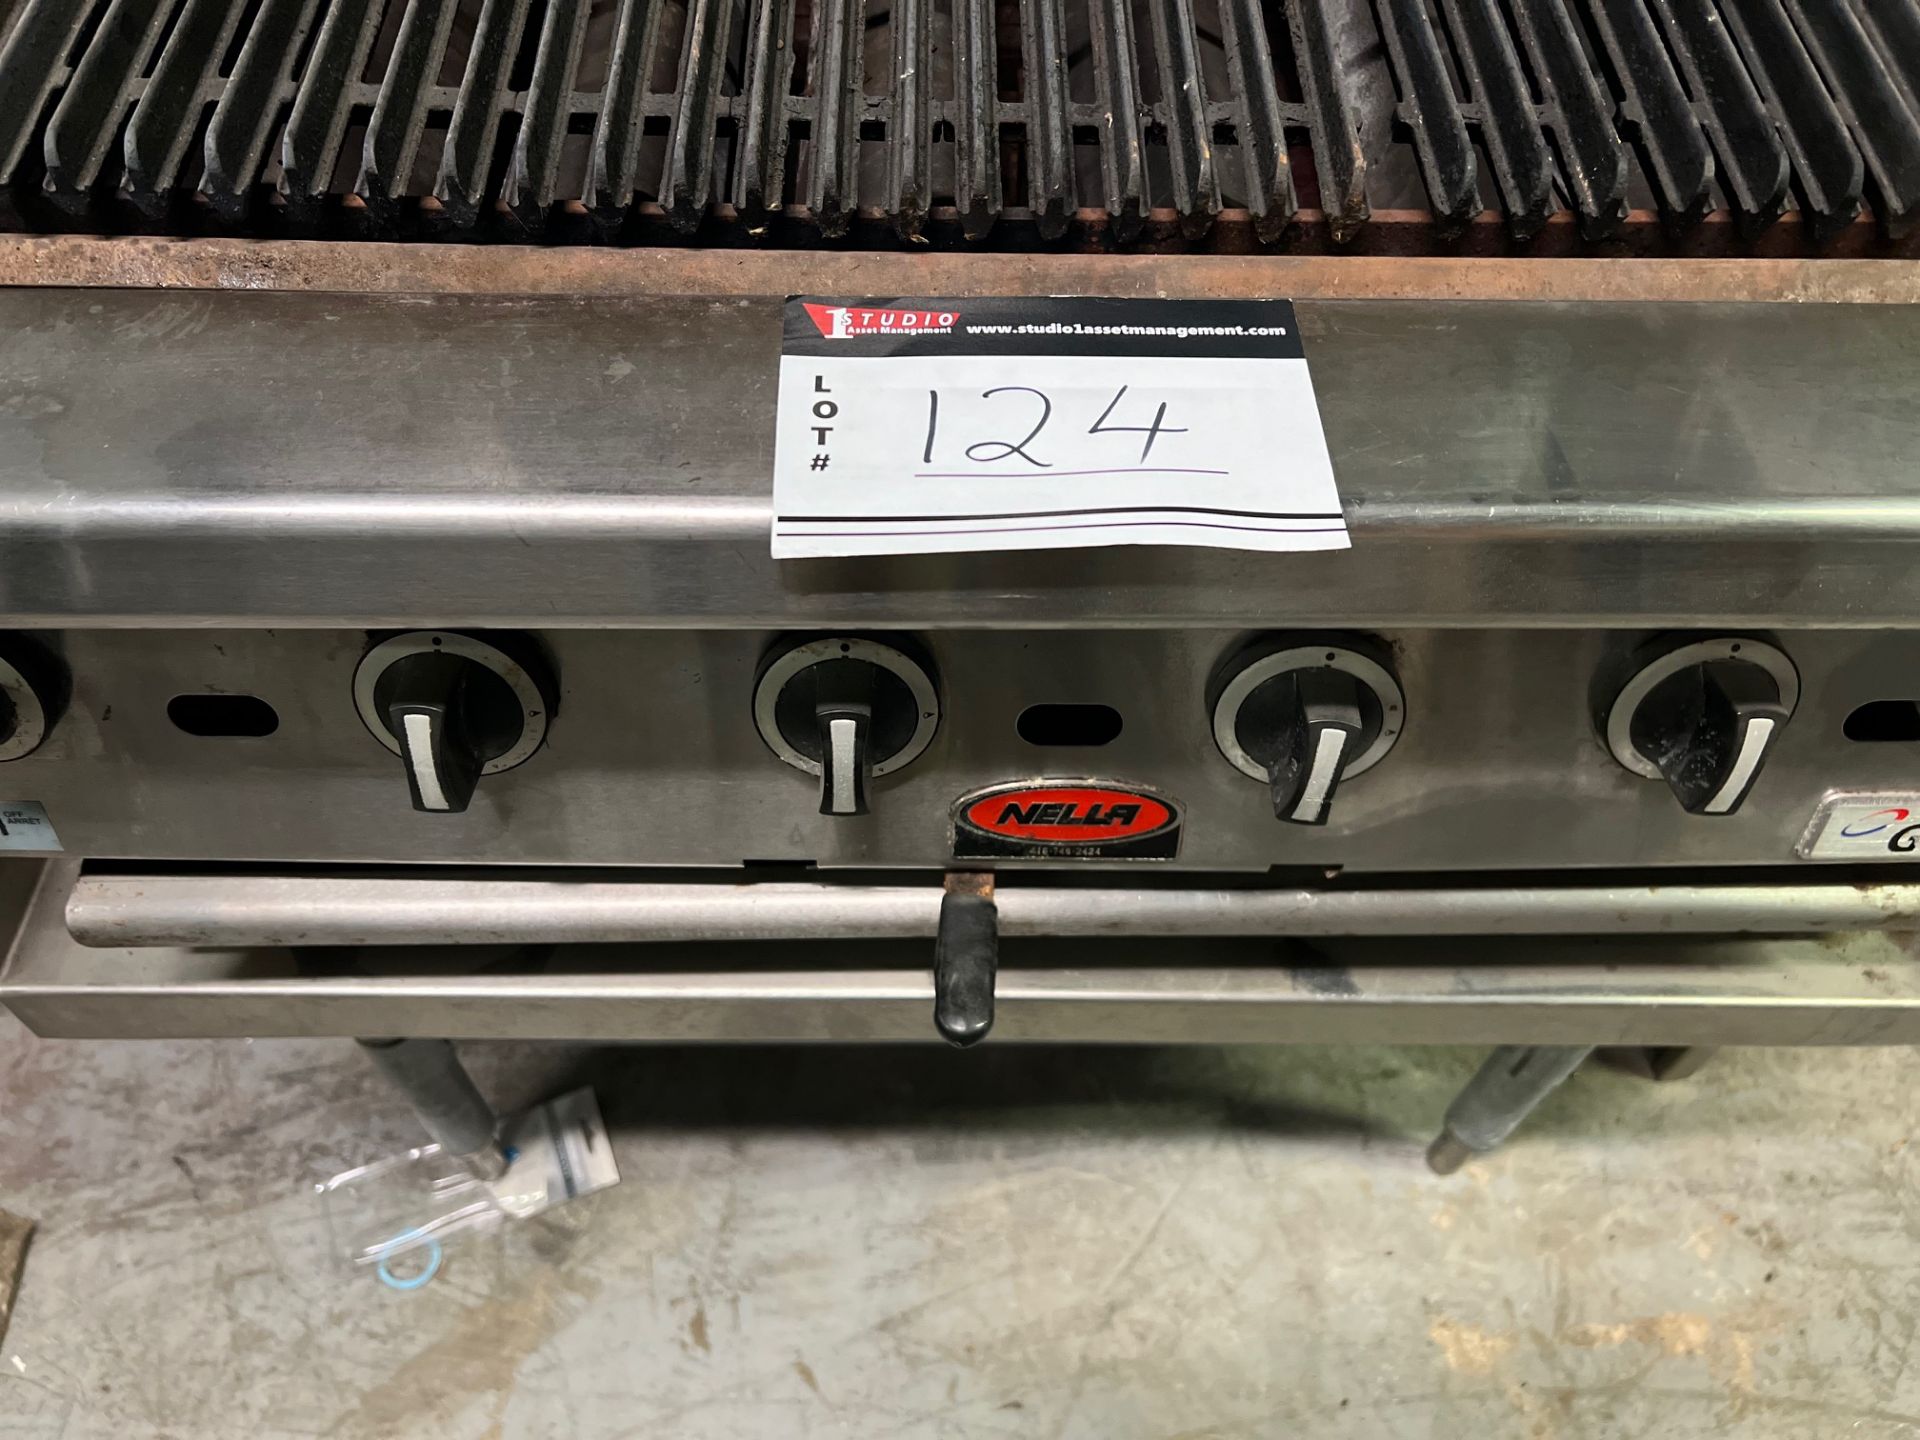 GARLAND GRILL (GAS), 35" - Image 5 of 5